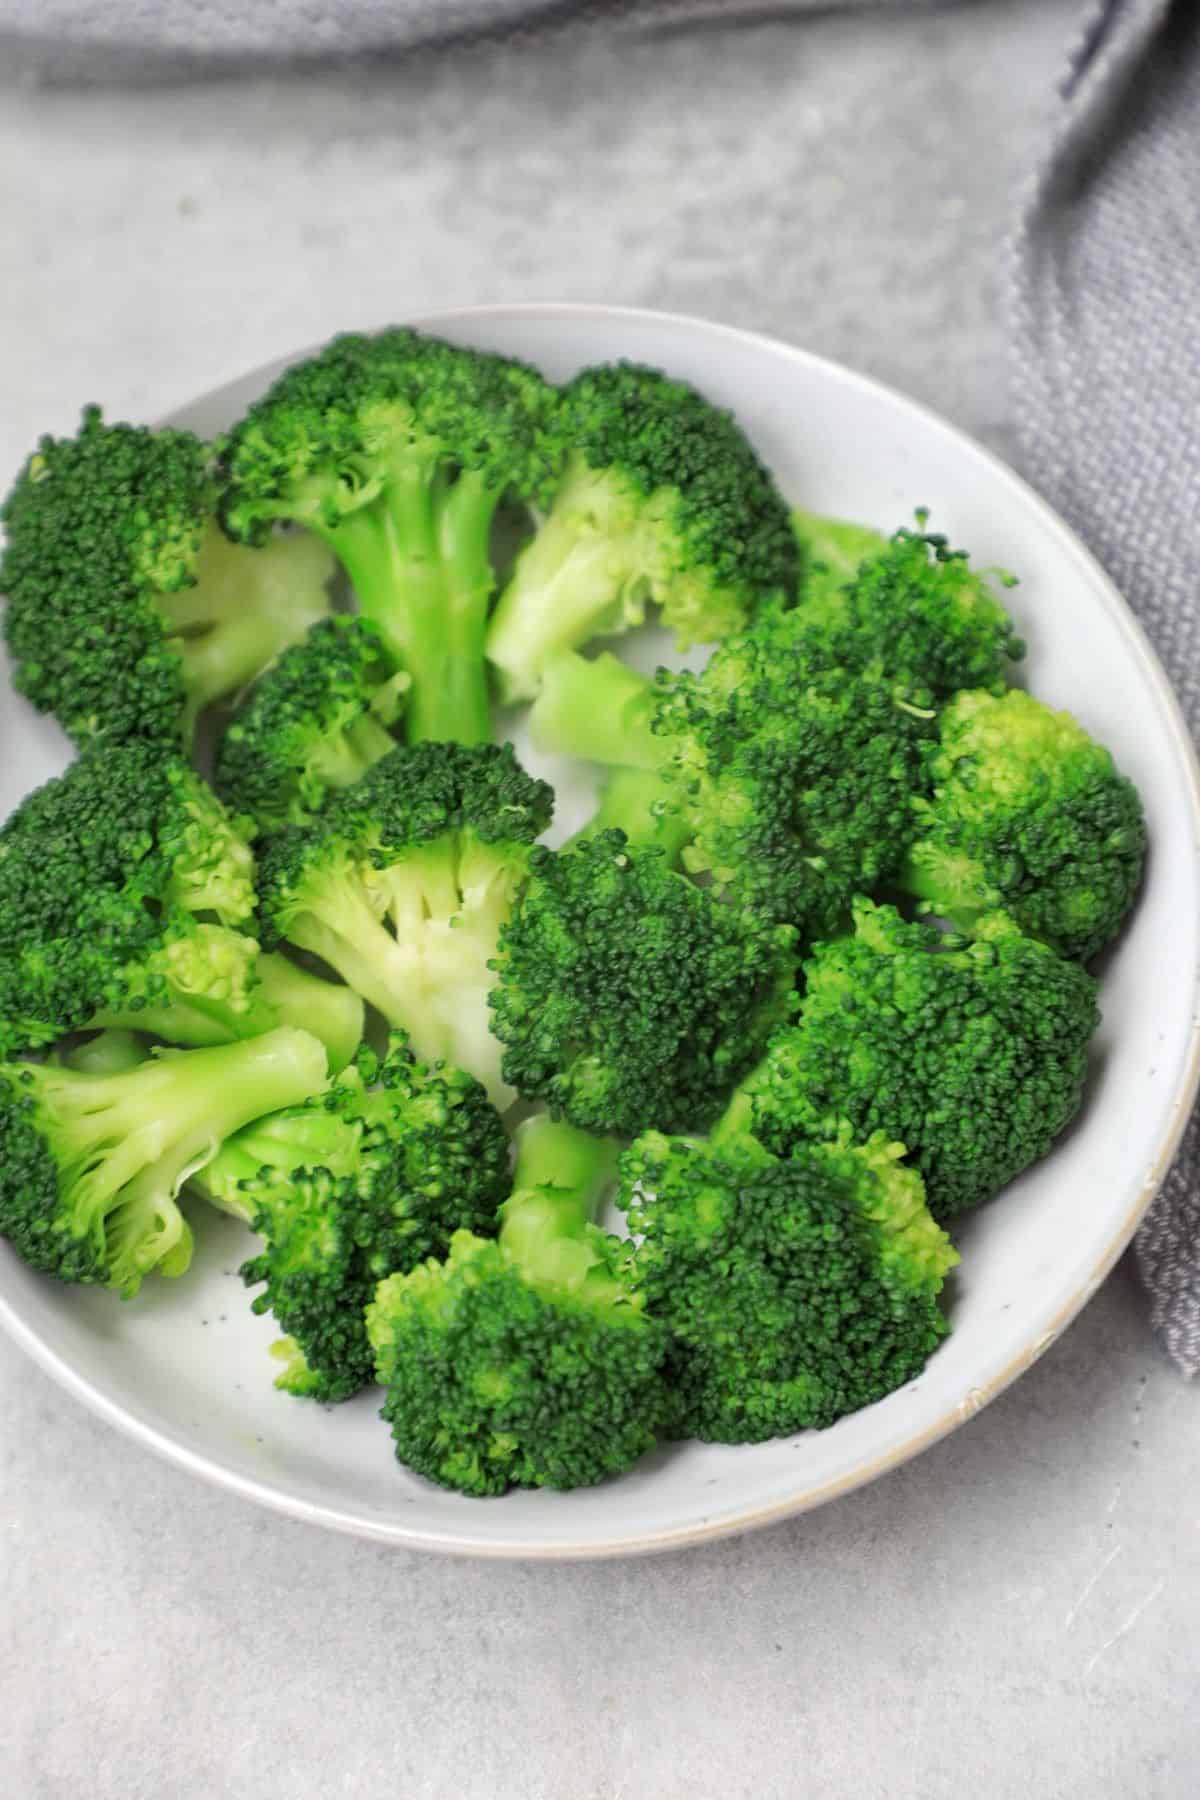 boiled broccoli served on a plate.